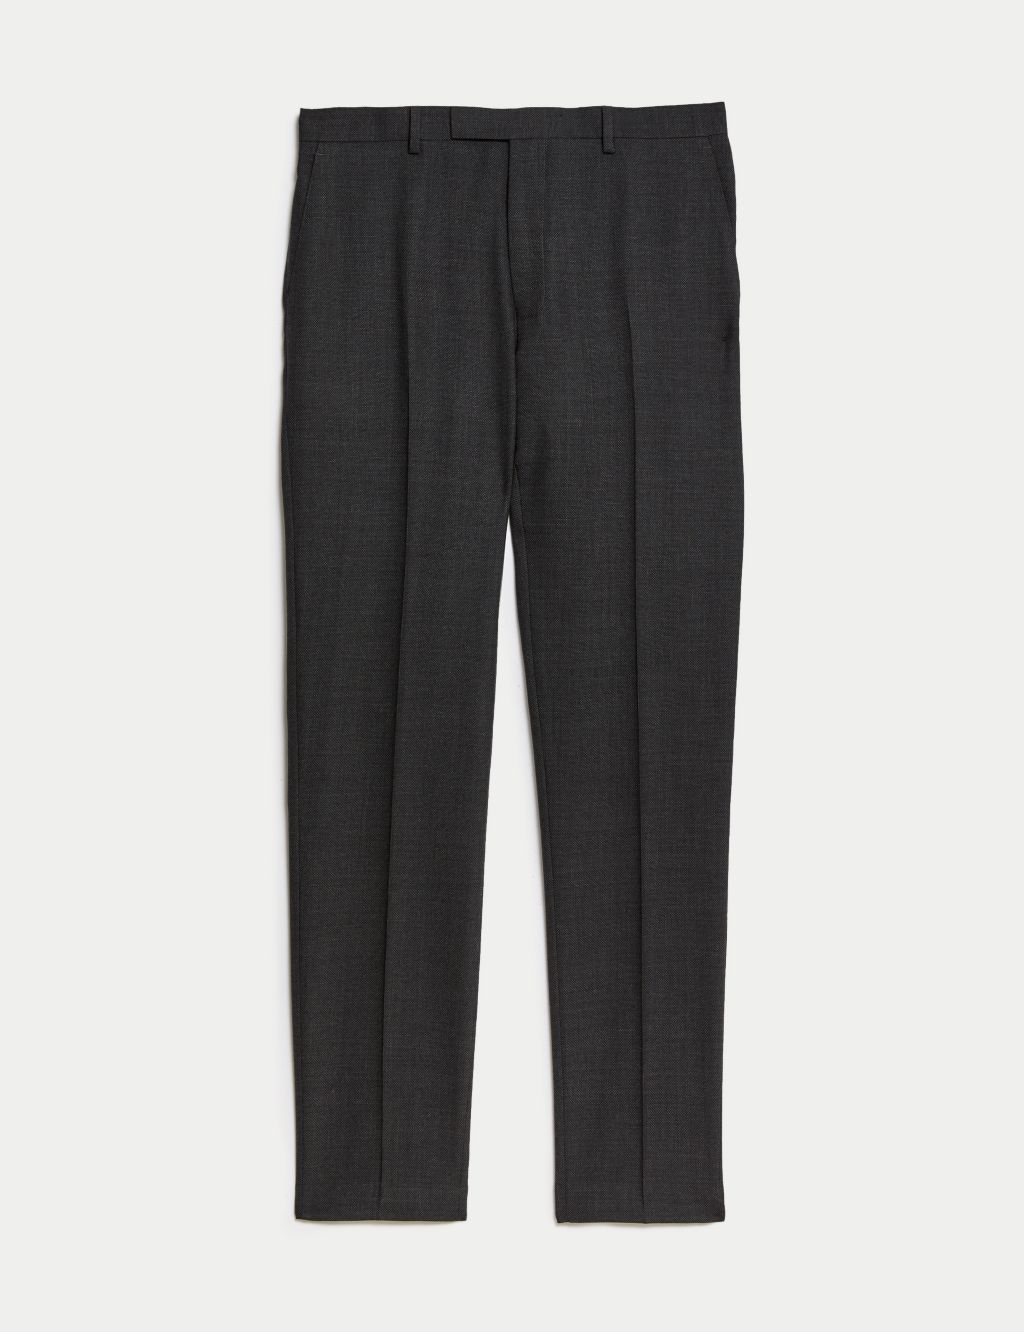 Slim Fit Pure Wool Textured Suit Trousers | M&S SARTORIAL | M&S